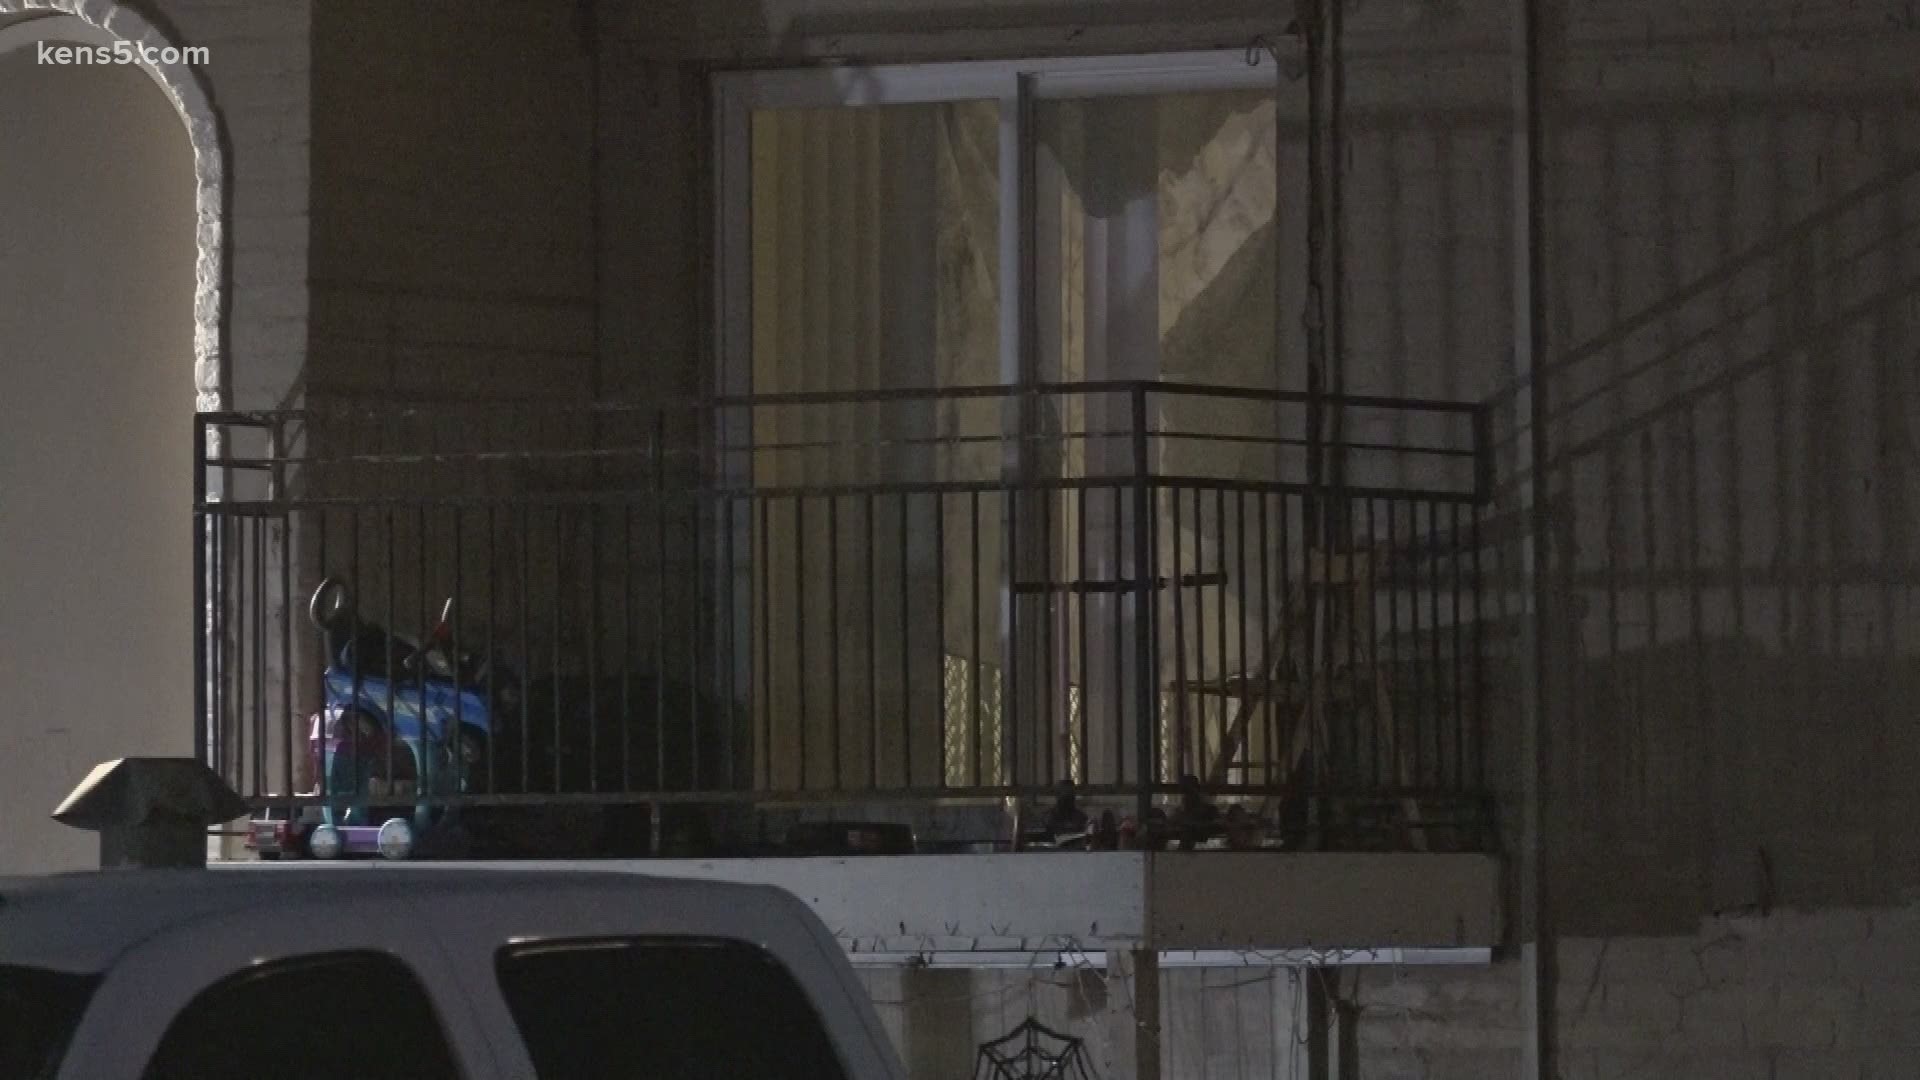 The San Antonio Police Department is searching for a man accused of shooting another man through the sliding glass door of an apartment.